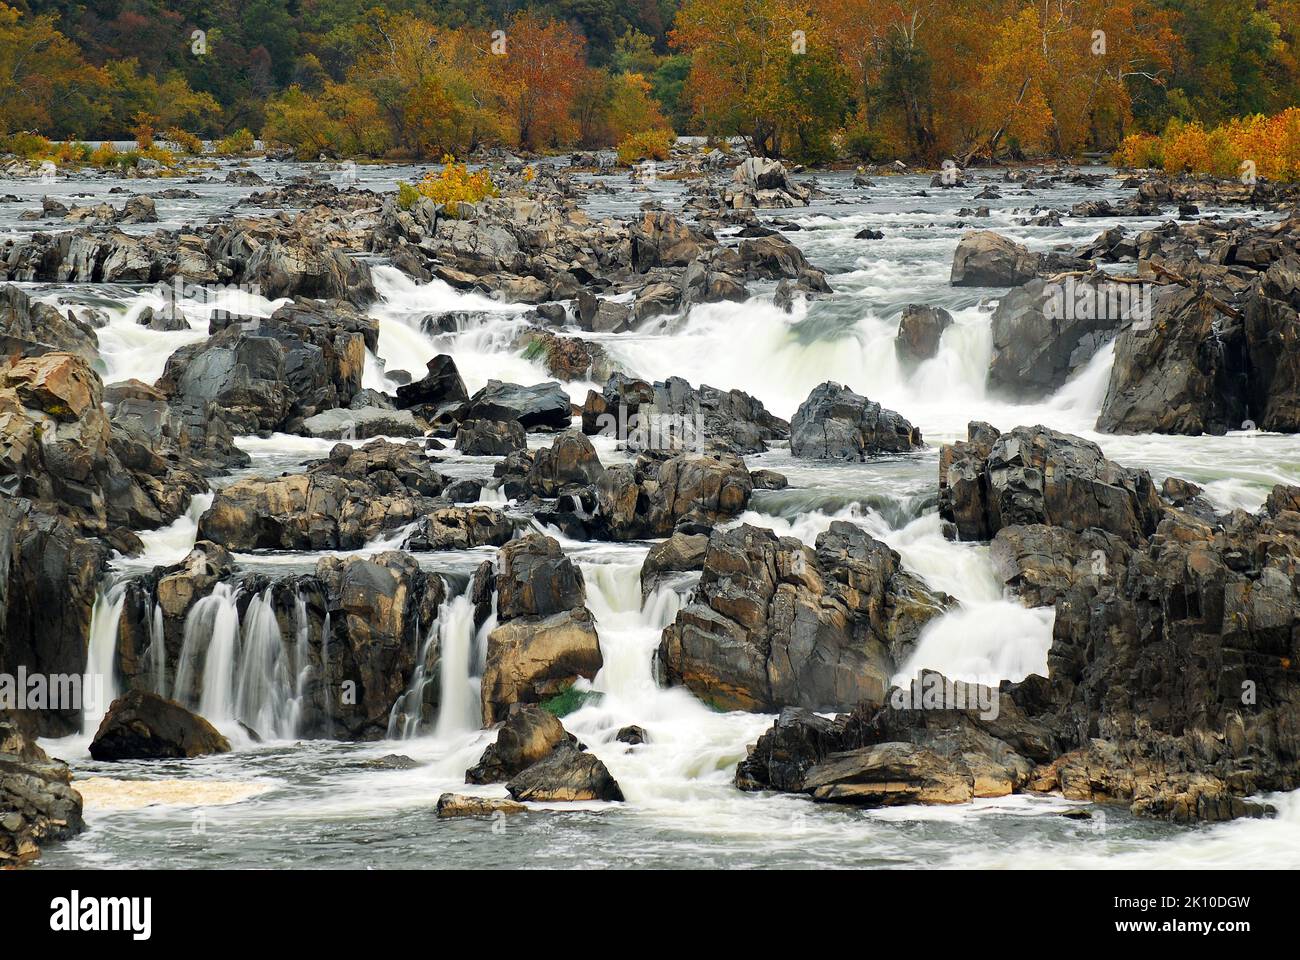 Water cascades over the rocks at the Great Falls of the Potomac waterfall set in a park in Virginia, outside of Washington, DC Stock Photo